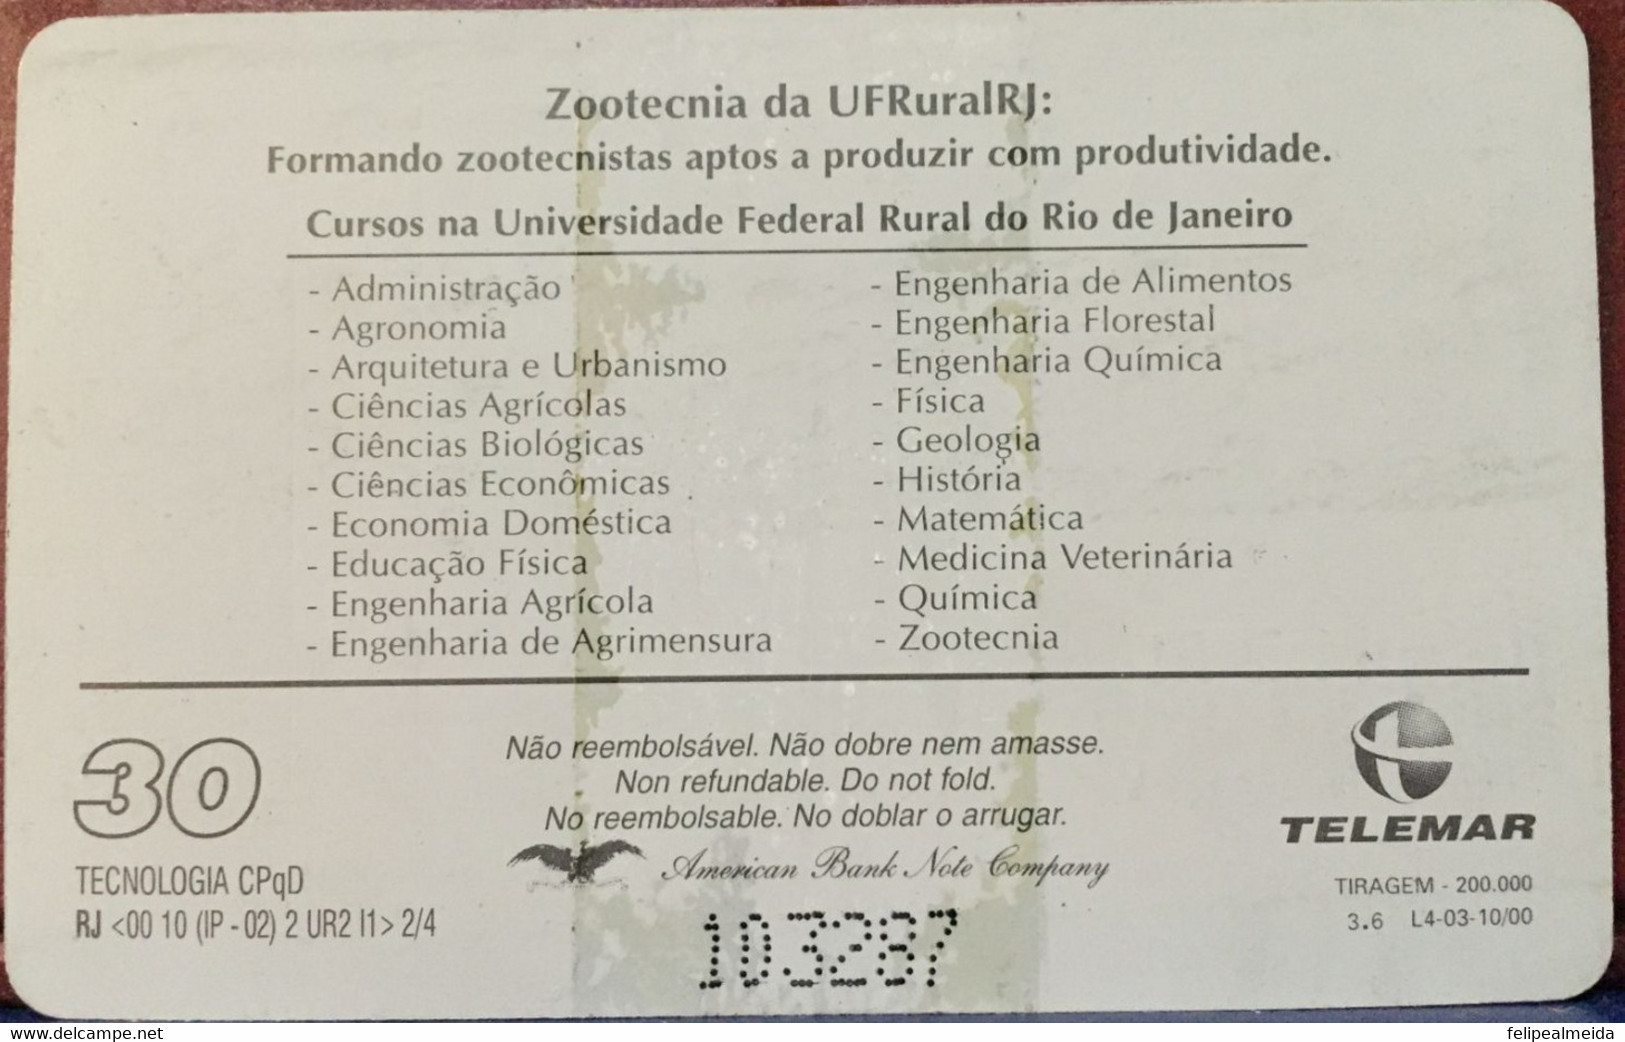 Phone Card Produced By Telemar In 2000 - Building Of The Animal Science Course At The Federal Rural University Of Rio De - Kultur